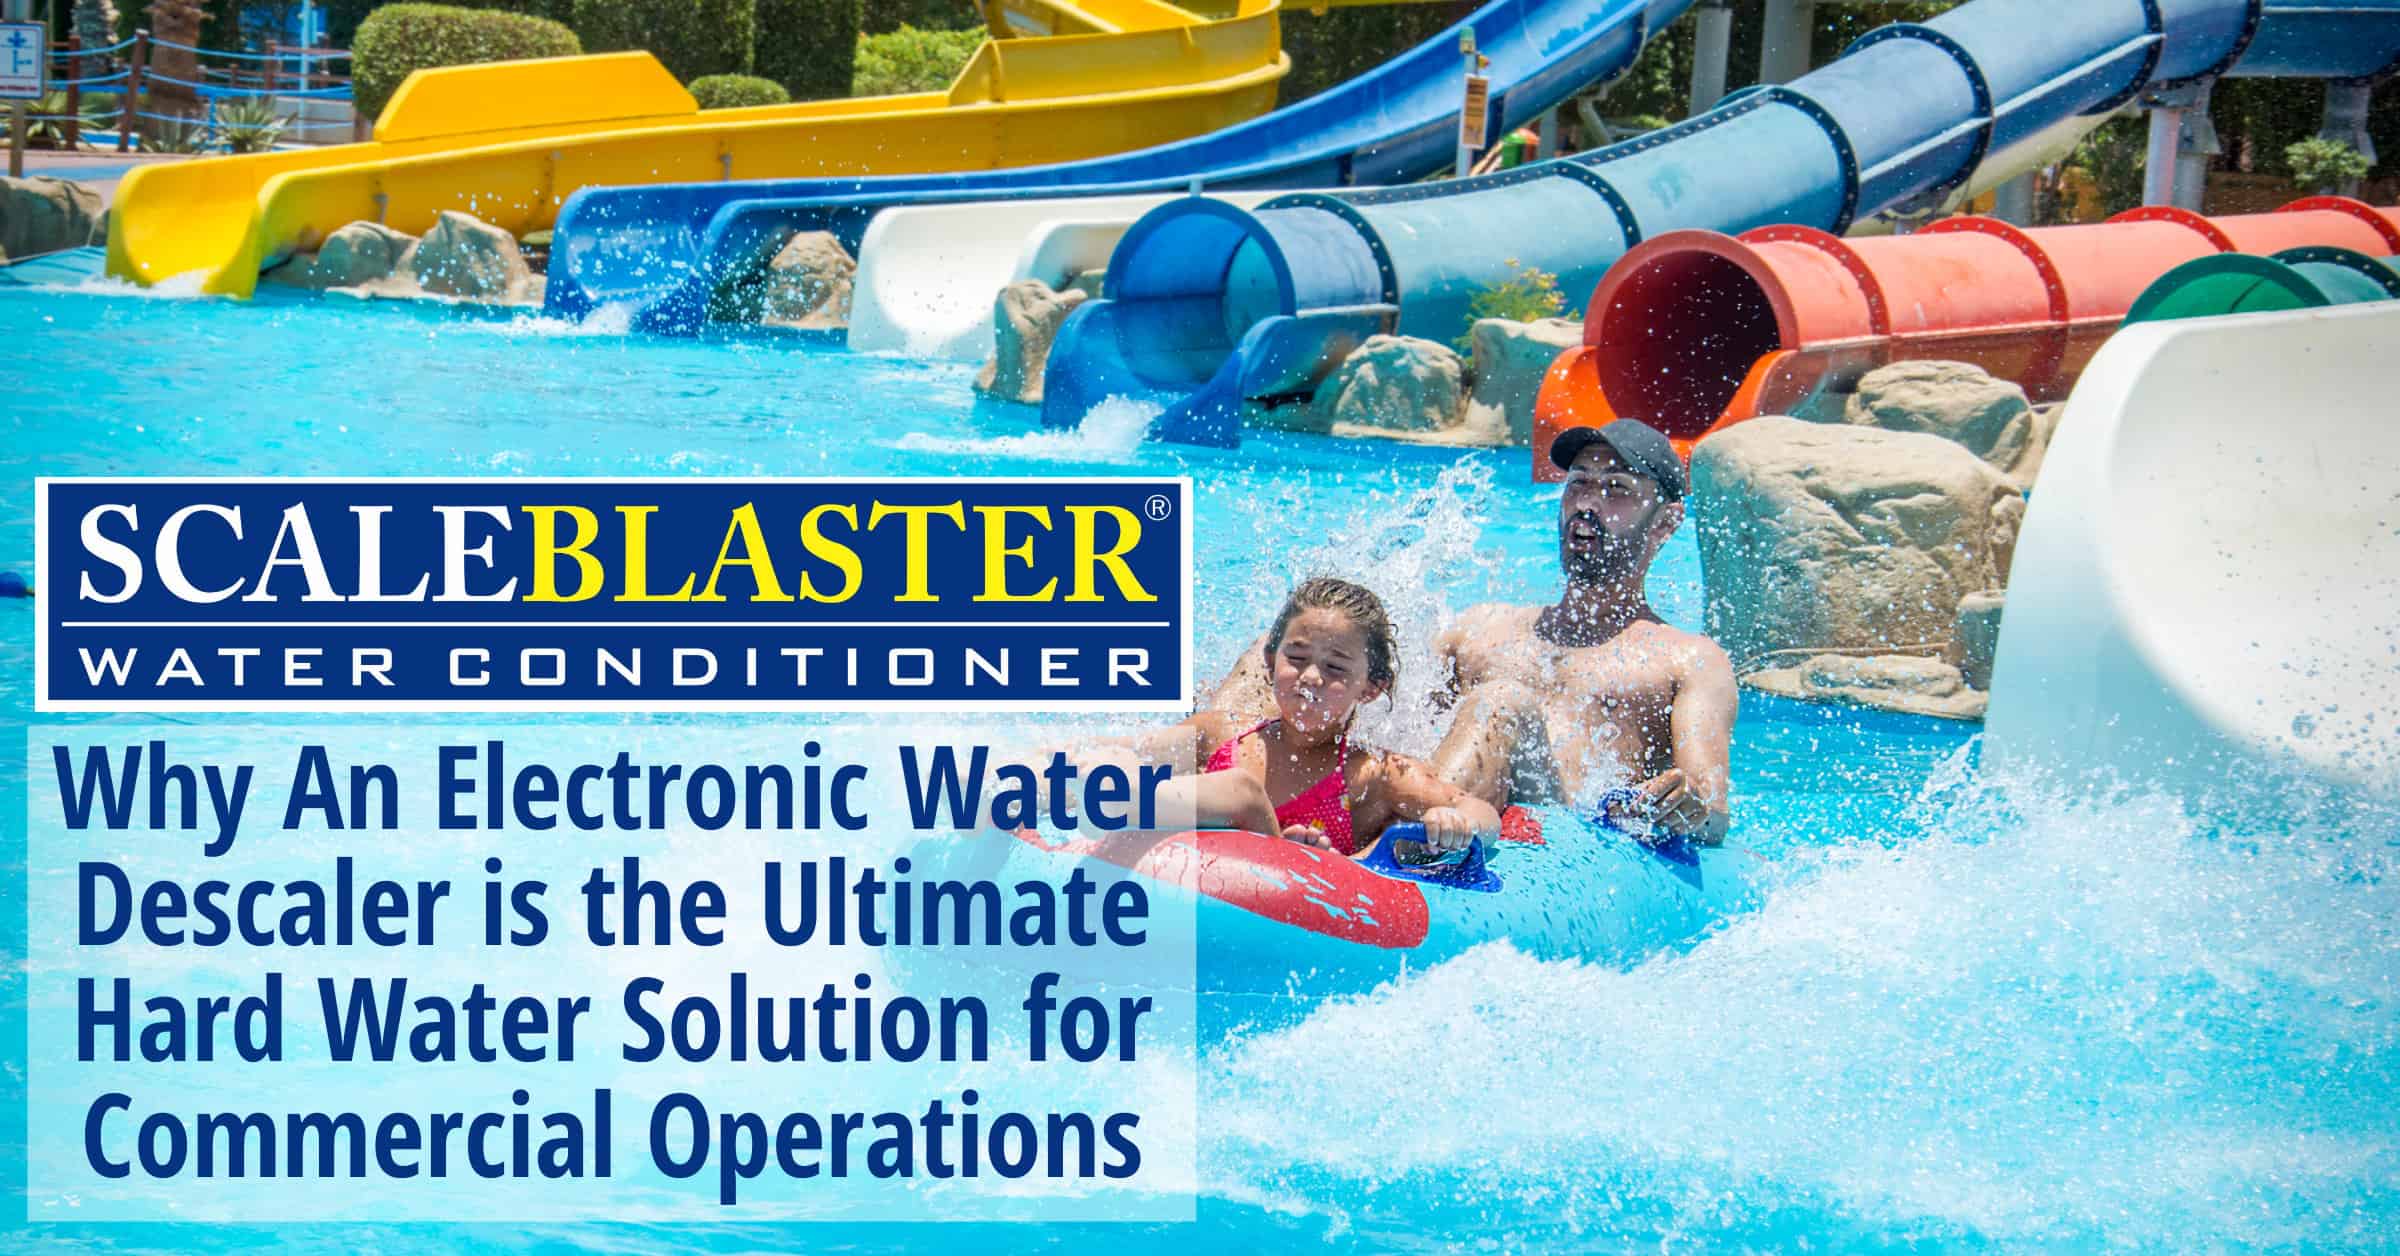 Electronic Water Descaler is the Ultimate Hard Water Solution 